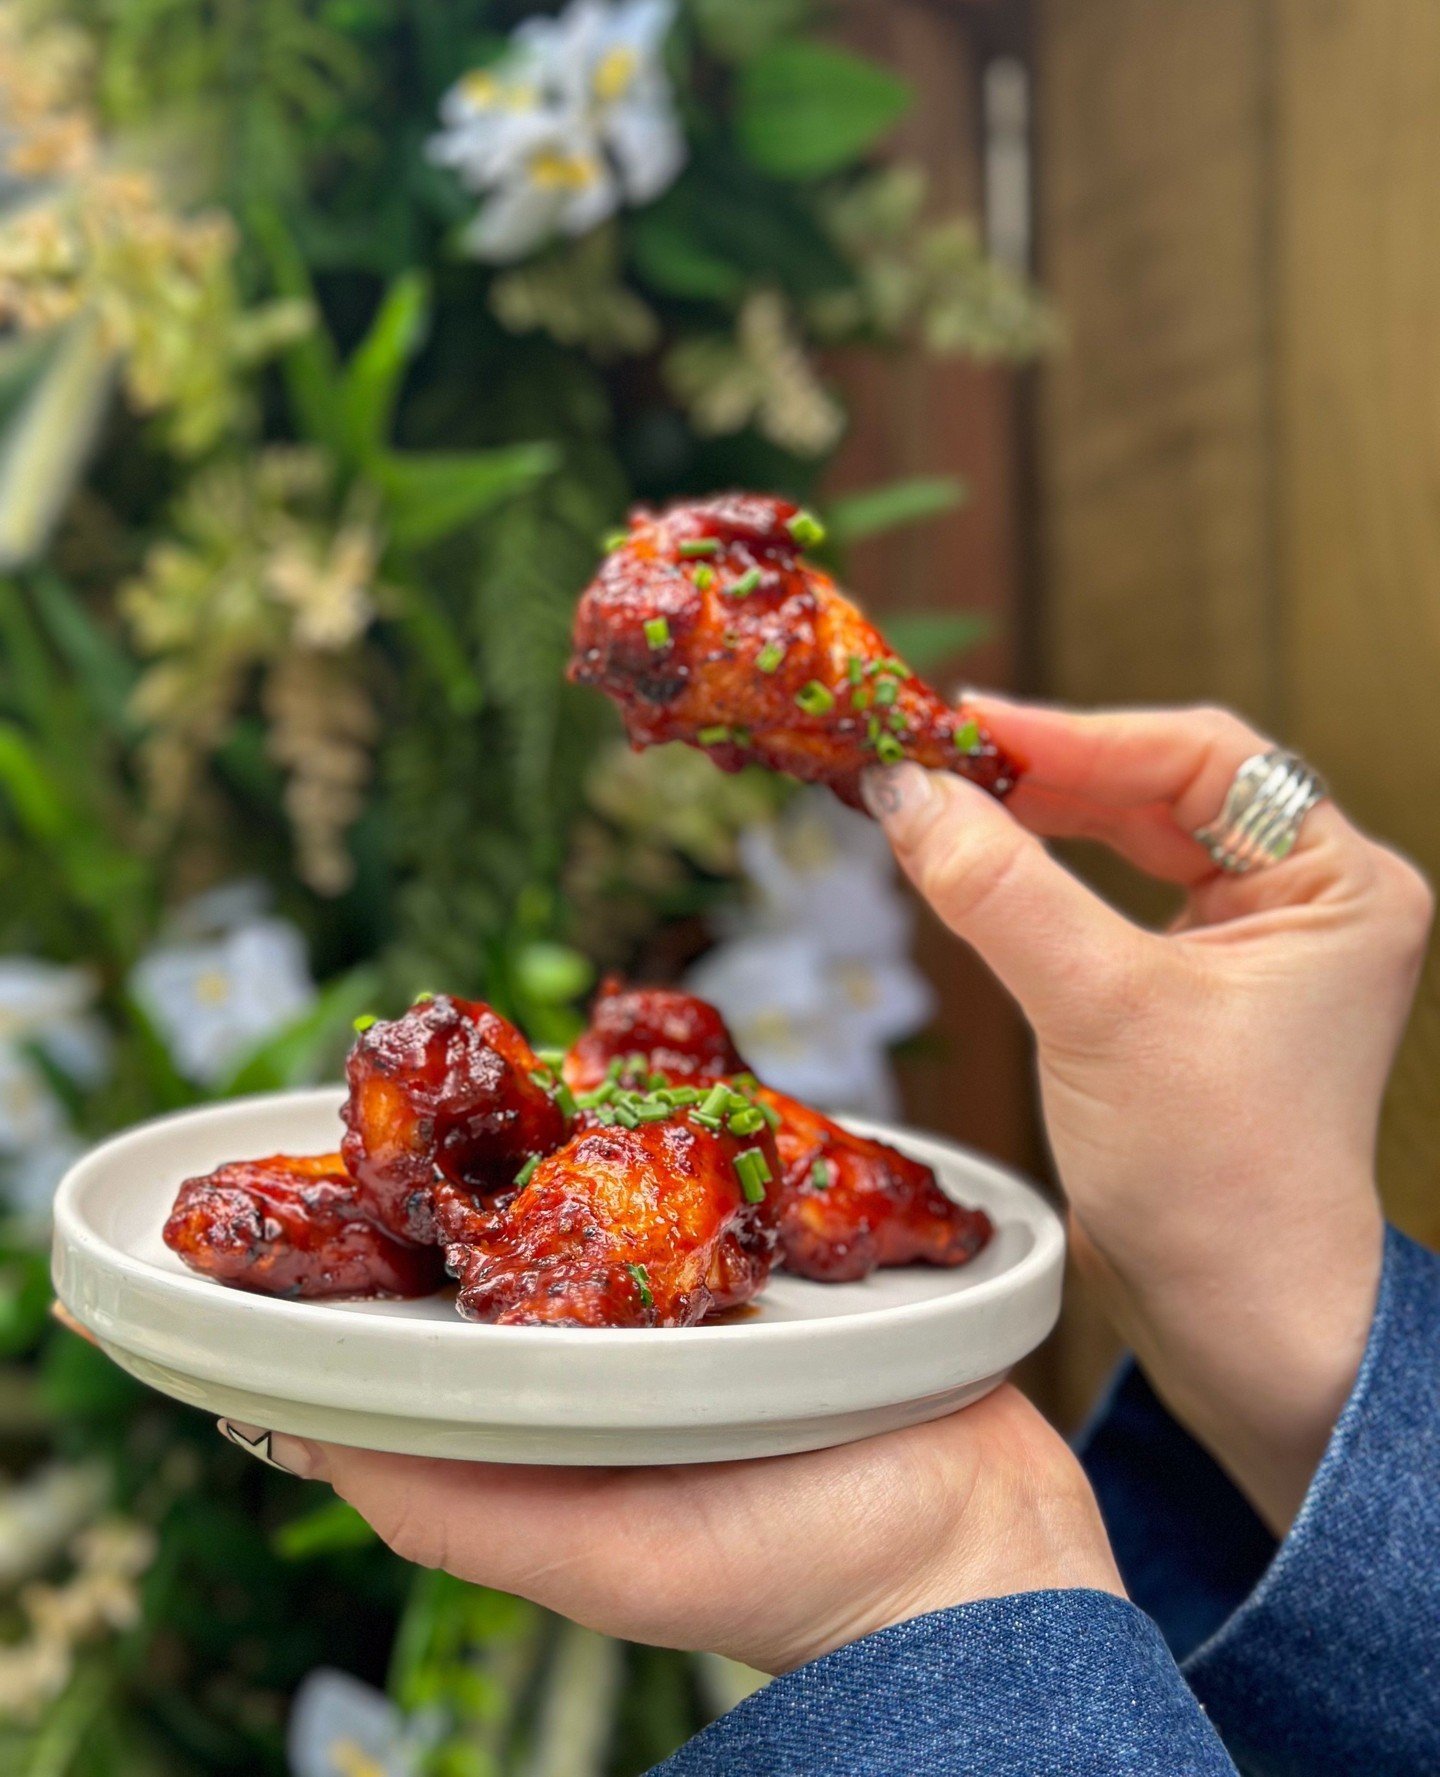 WINGS WEDNESDAY 🤤⁠
⁠
The only way to do Wednesday's right with unlimited wings for 90 minutes from 12PM - 8:30PM for &pound;10pp!⁠
⁠
Tuck into our House BBQ, Maple &amp; Bacon, Sriracha &amp; Lime or Cauliflower Wings (VG friendly!).⁠
⁠
Book your ta